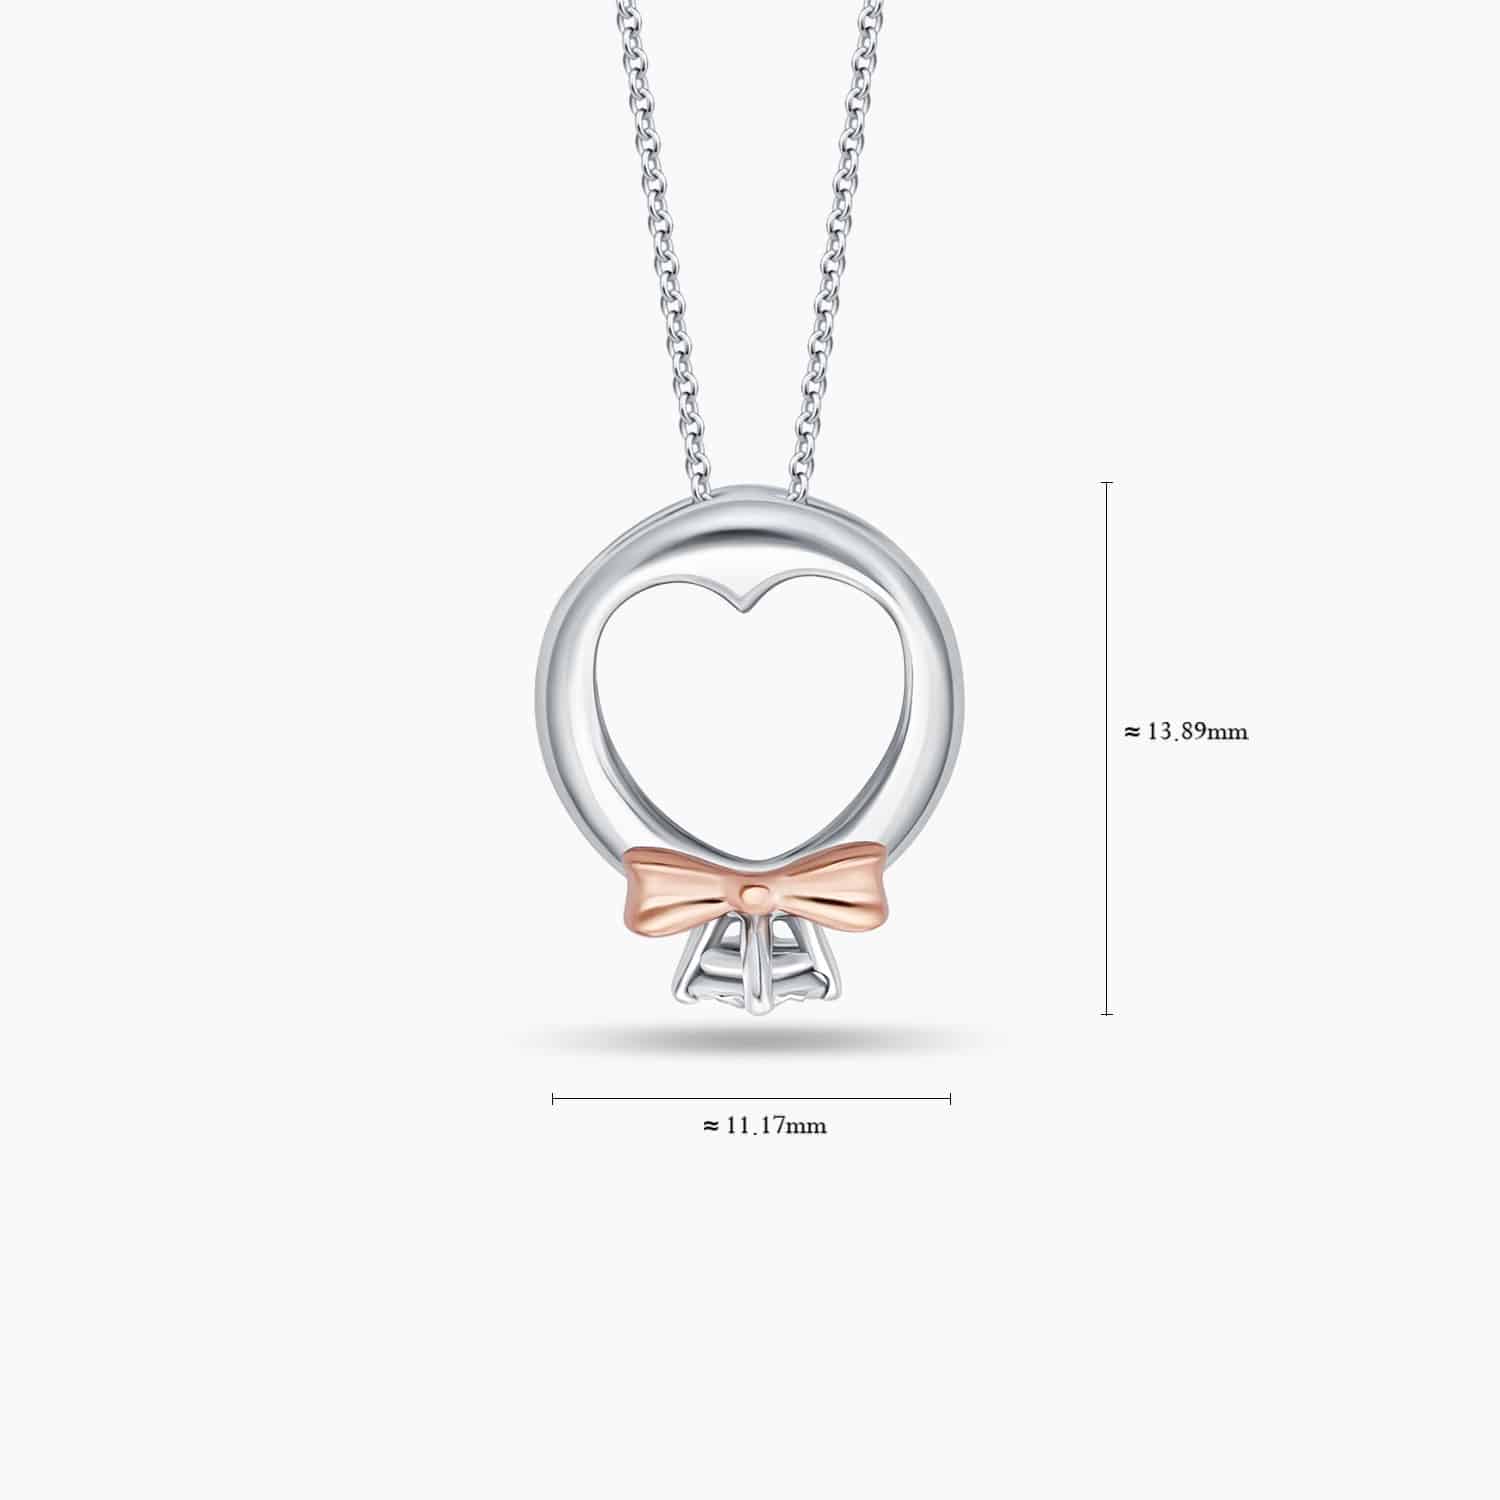 LVC Charmes Bow Mini Ring Diamond Pendant made in 14K White Gold/Rose Gold & 1 Diamond 0.03 carat. Comes with 10K White Gold chain